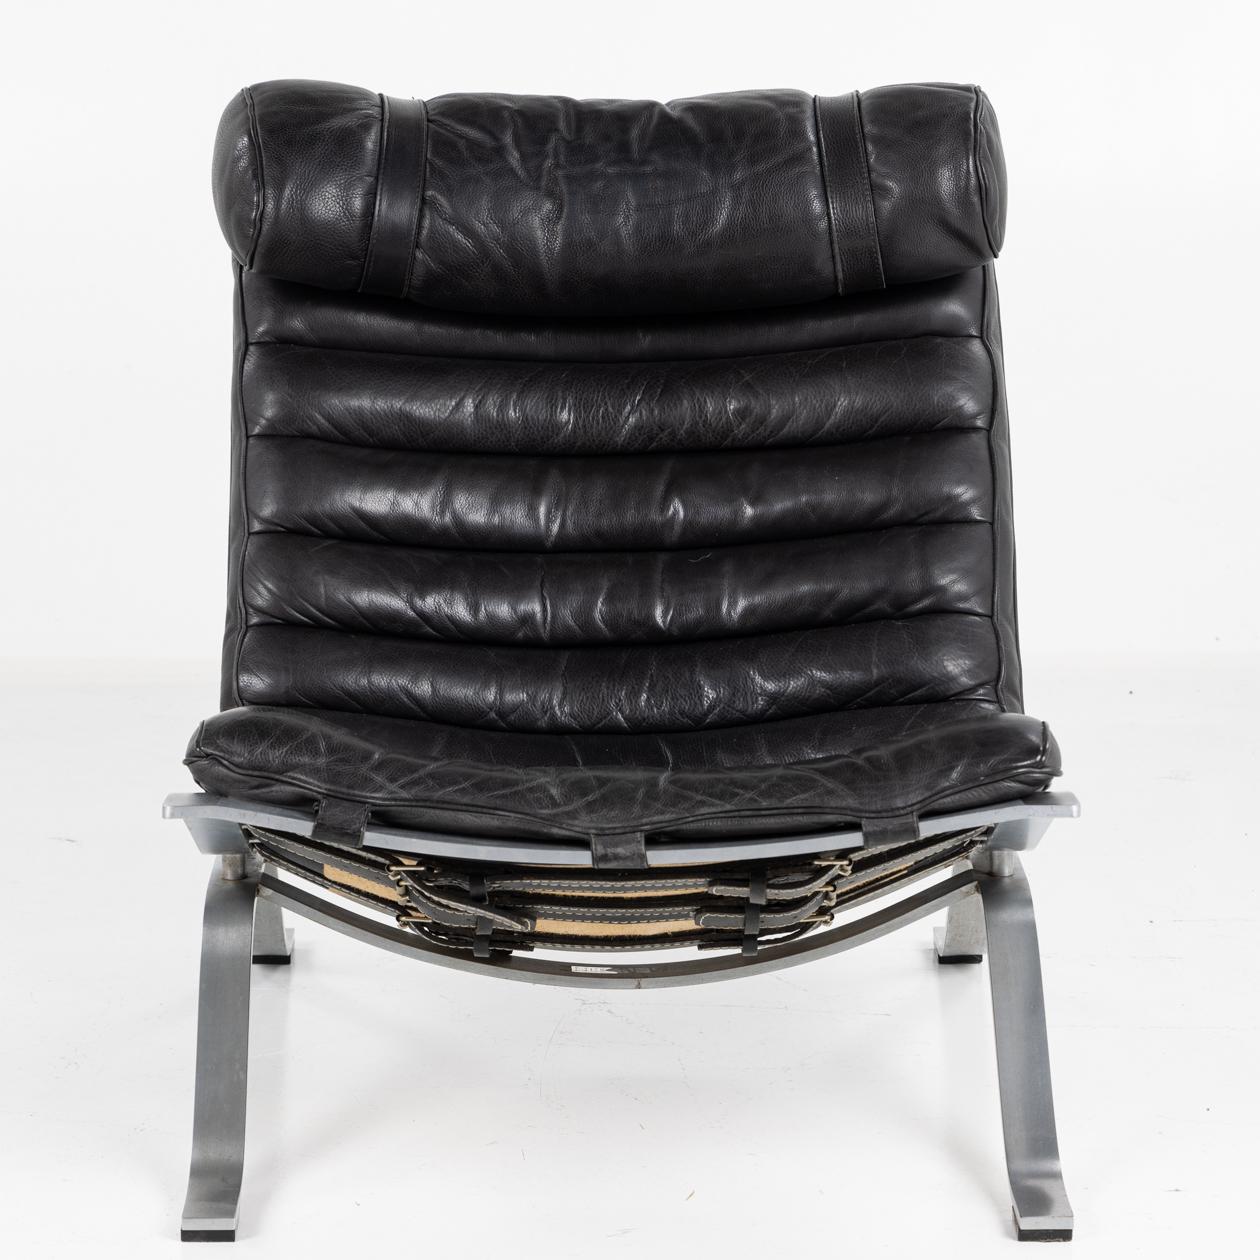 'Ari' easy chair with matching stool in black buffalo leather and steel frame.
Made from buffalo leather original. Designed by Arne Norell for Norell Möbel AB.